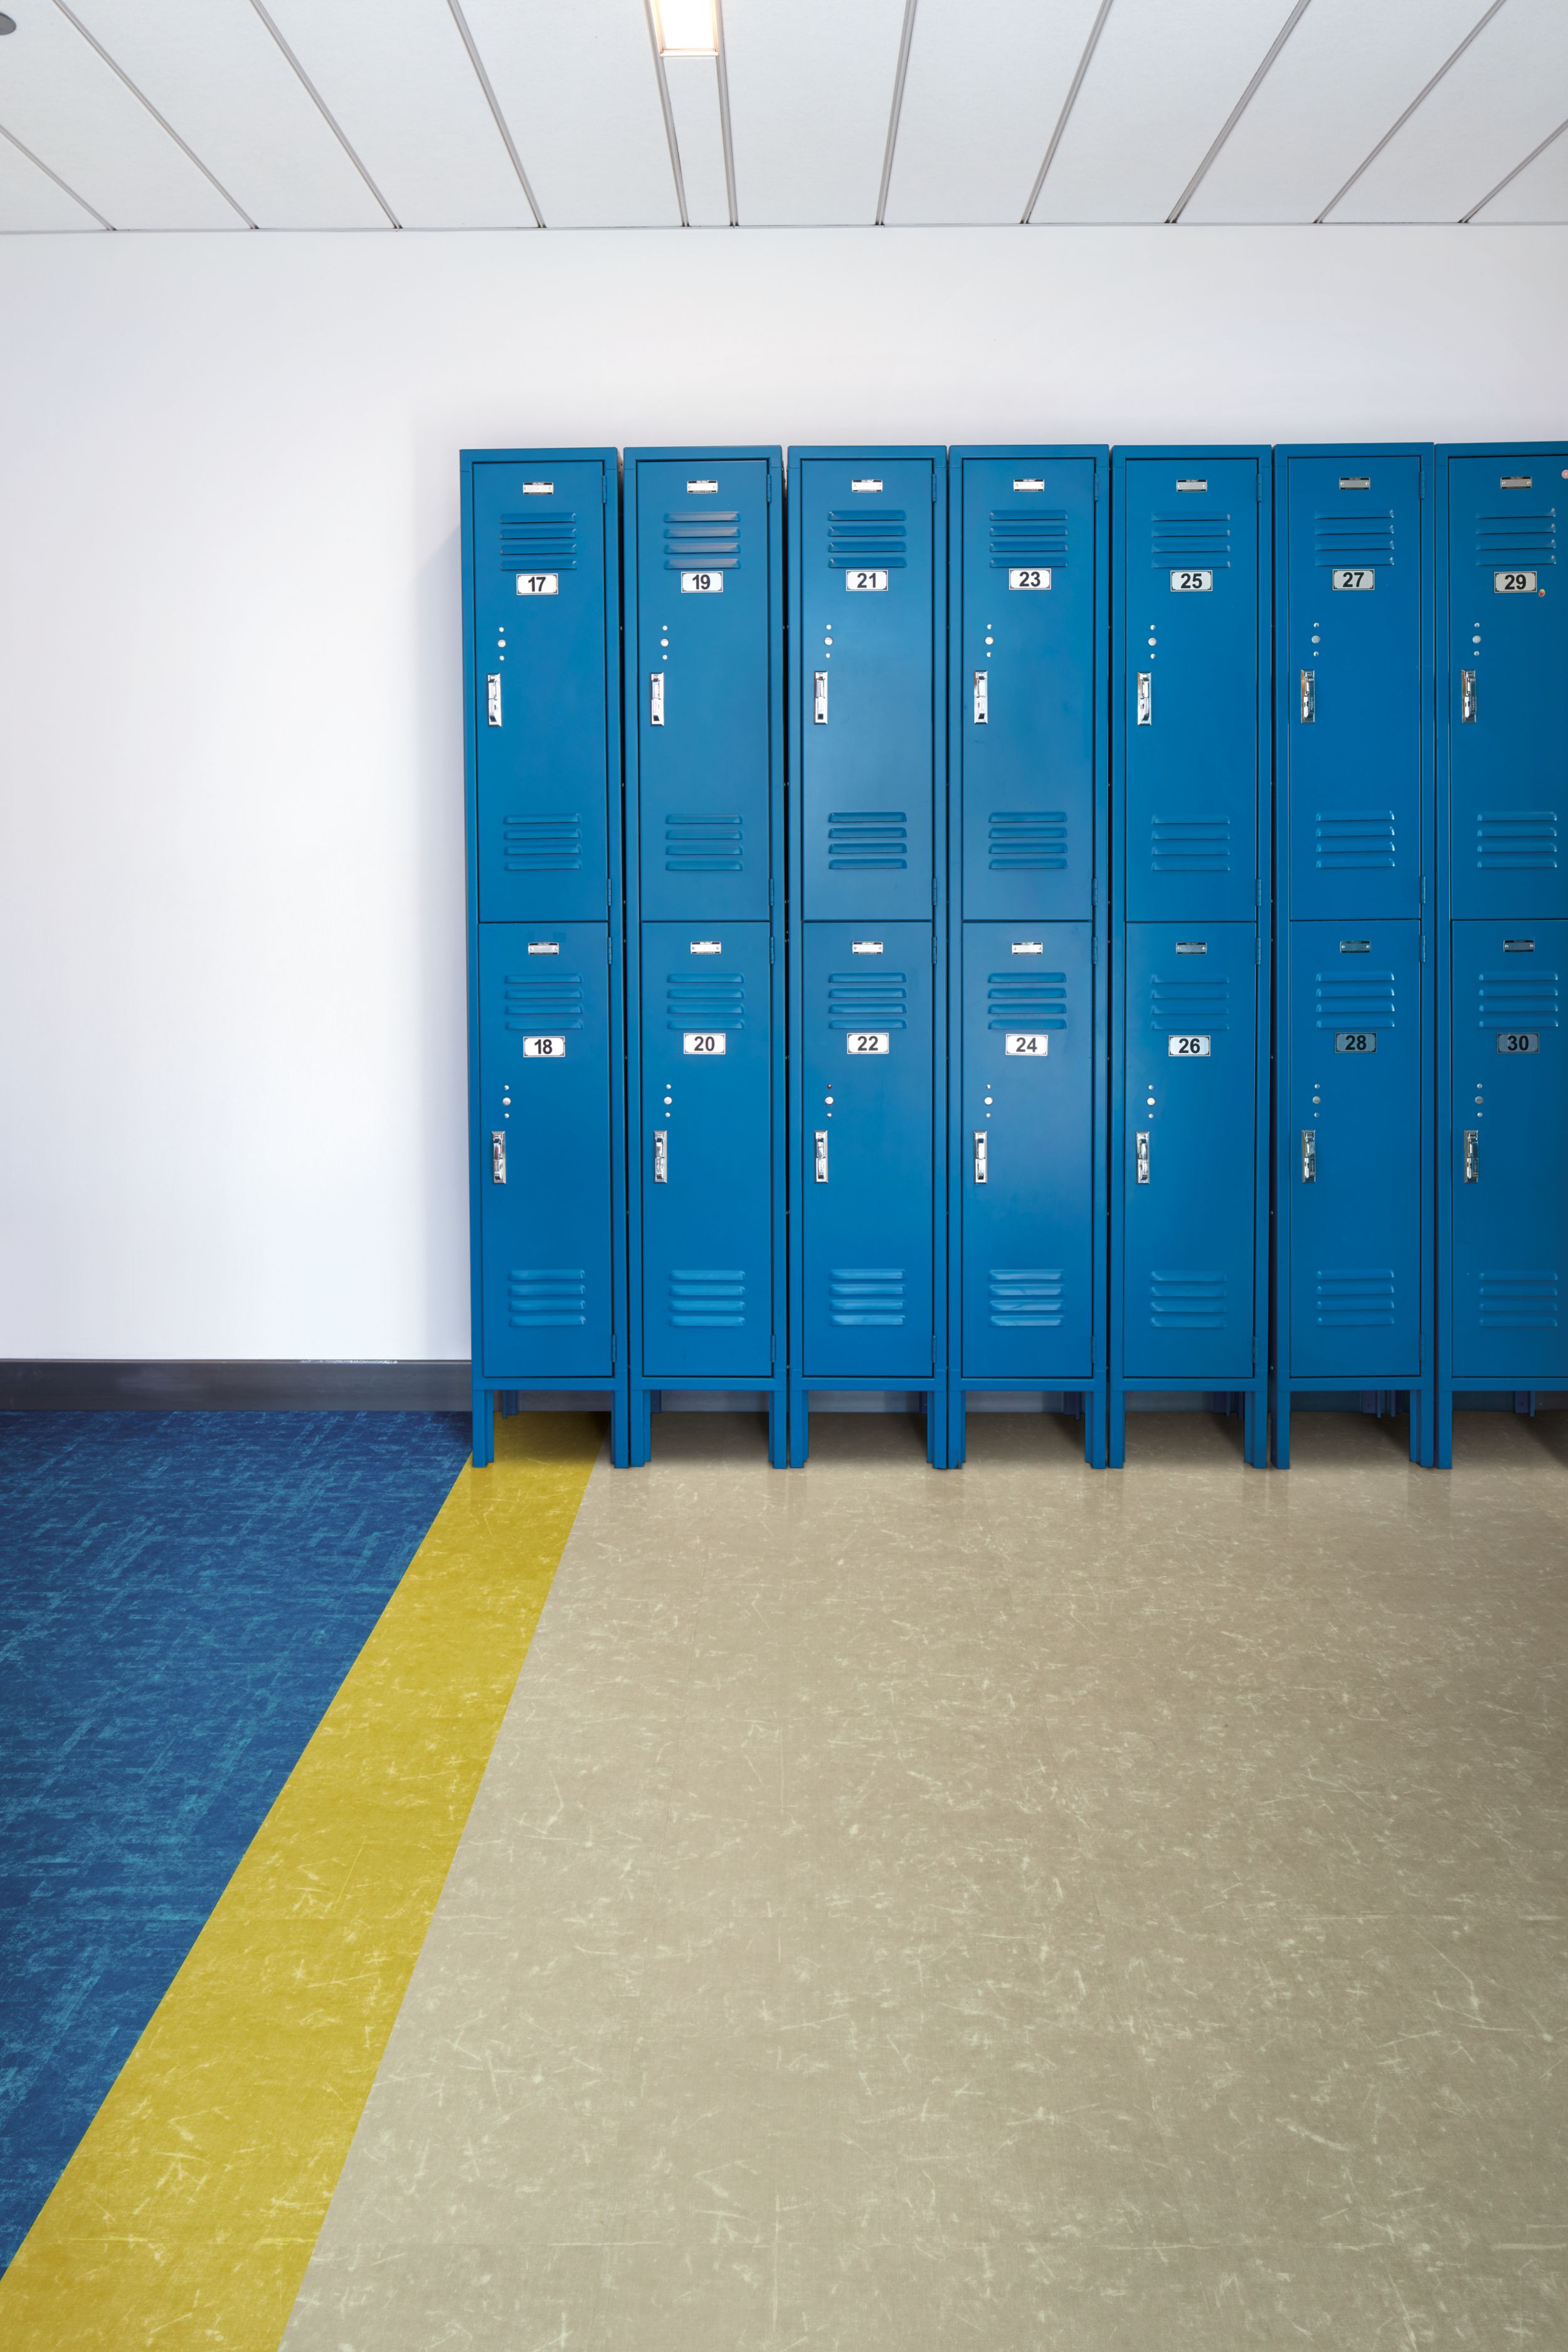 Interface Scorpio and Aries LVT in school hallway with lockers numéro d’image 8